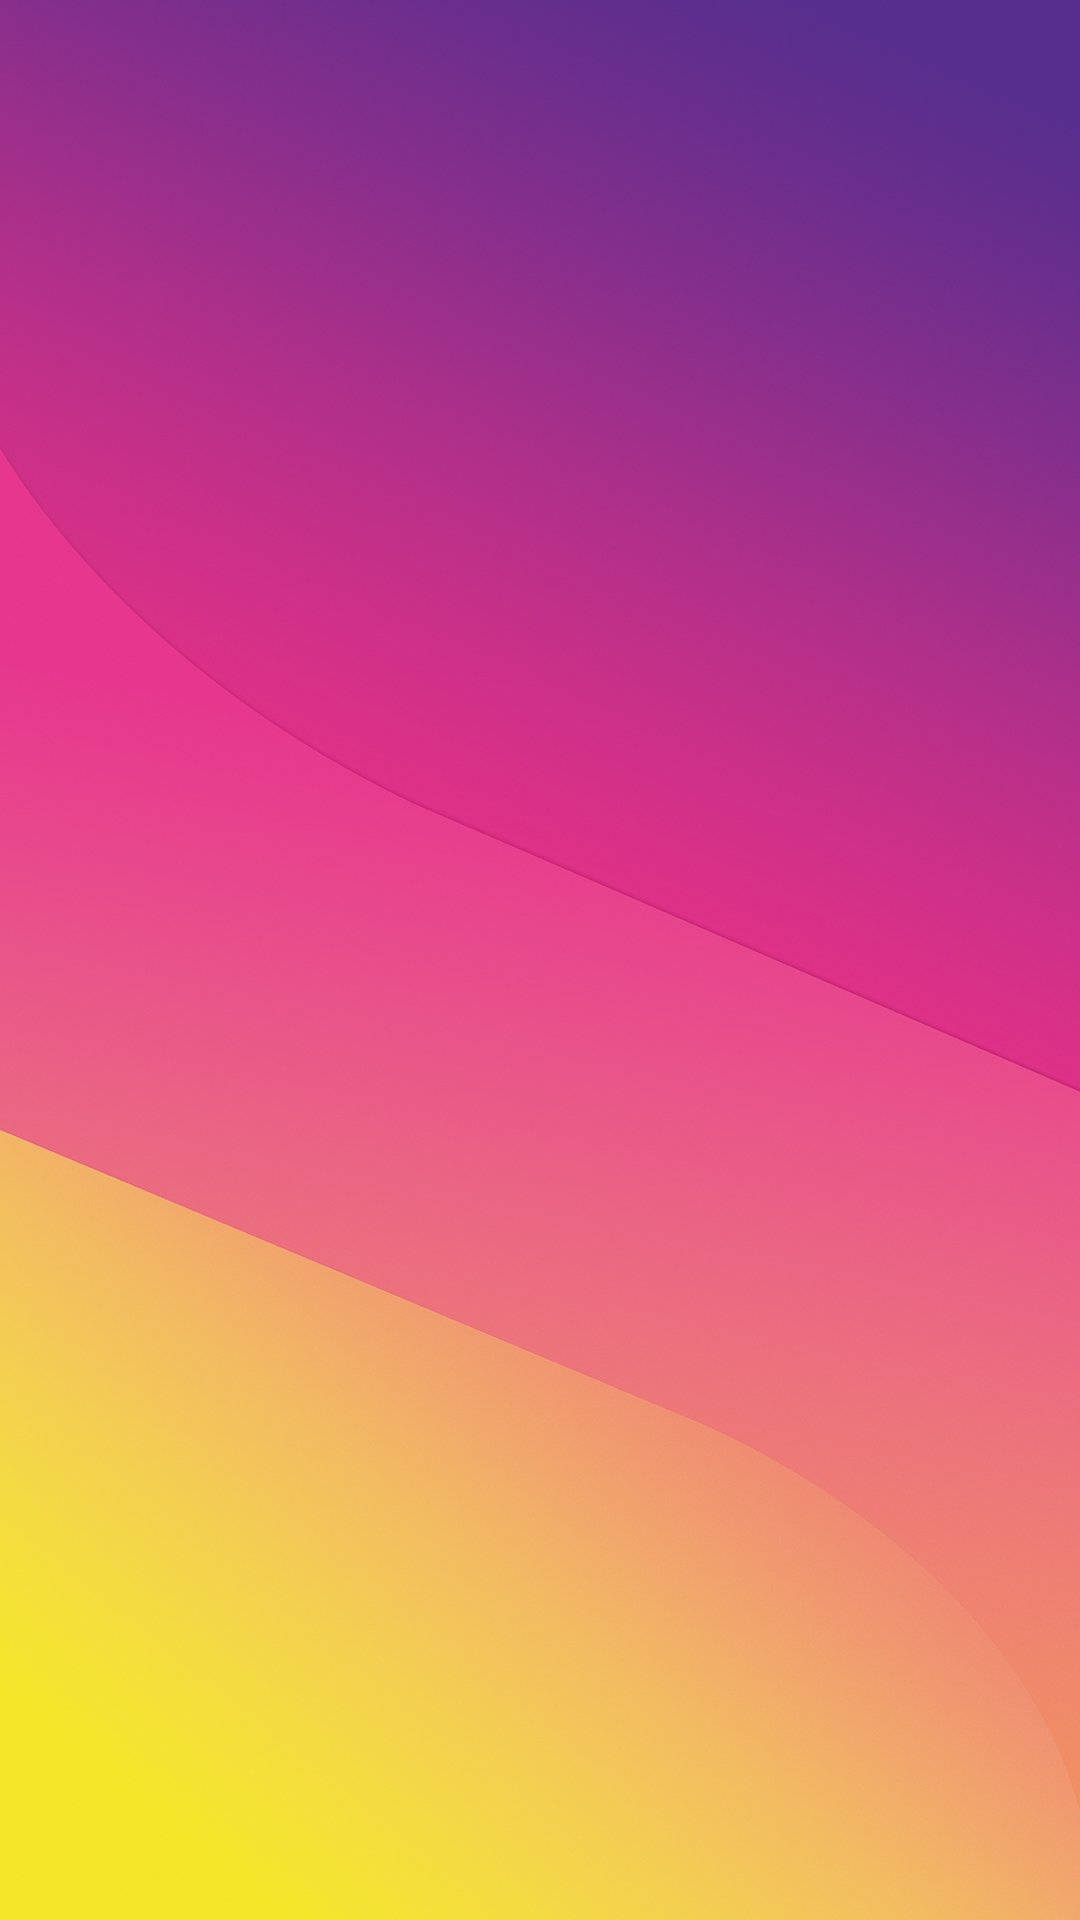 Dazzling Abstract Gradient Wallpaper For Oppo A5s Wallpaper